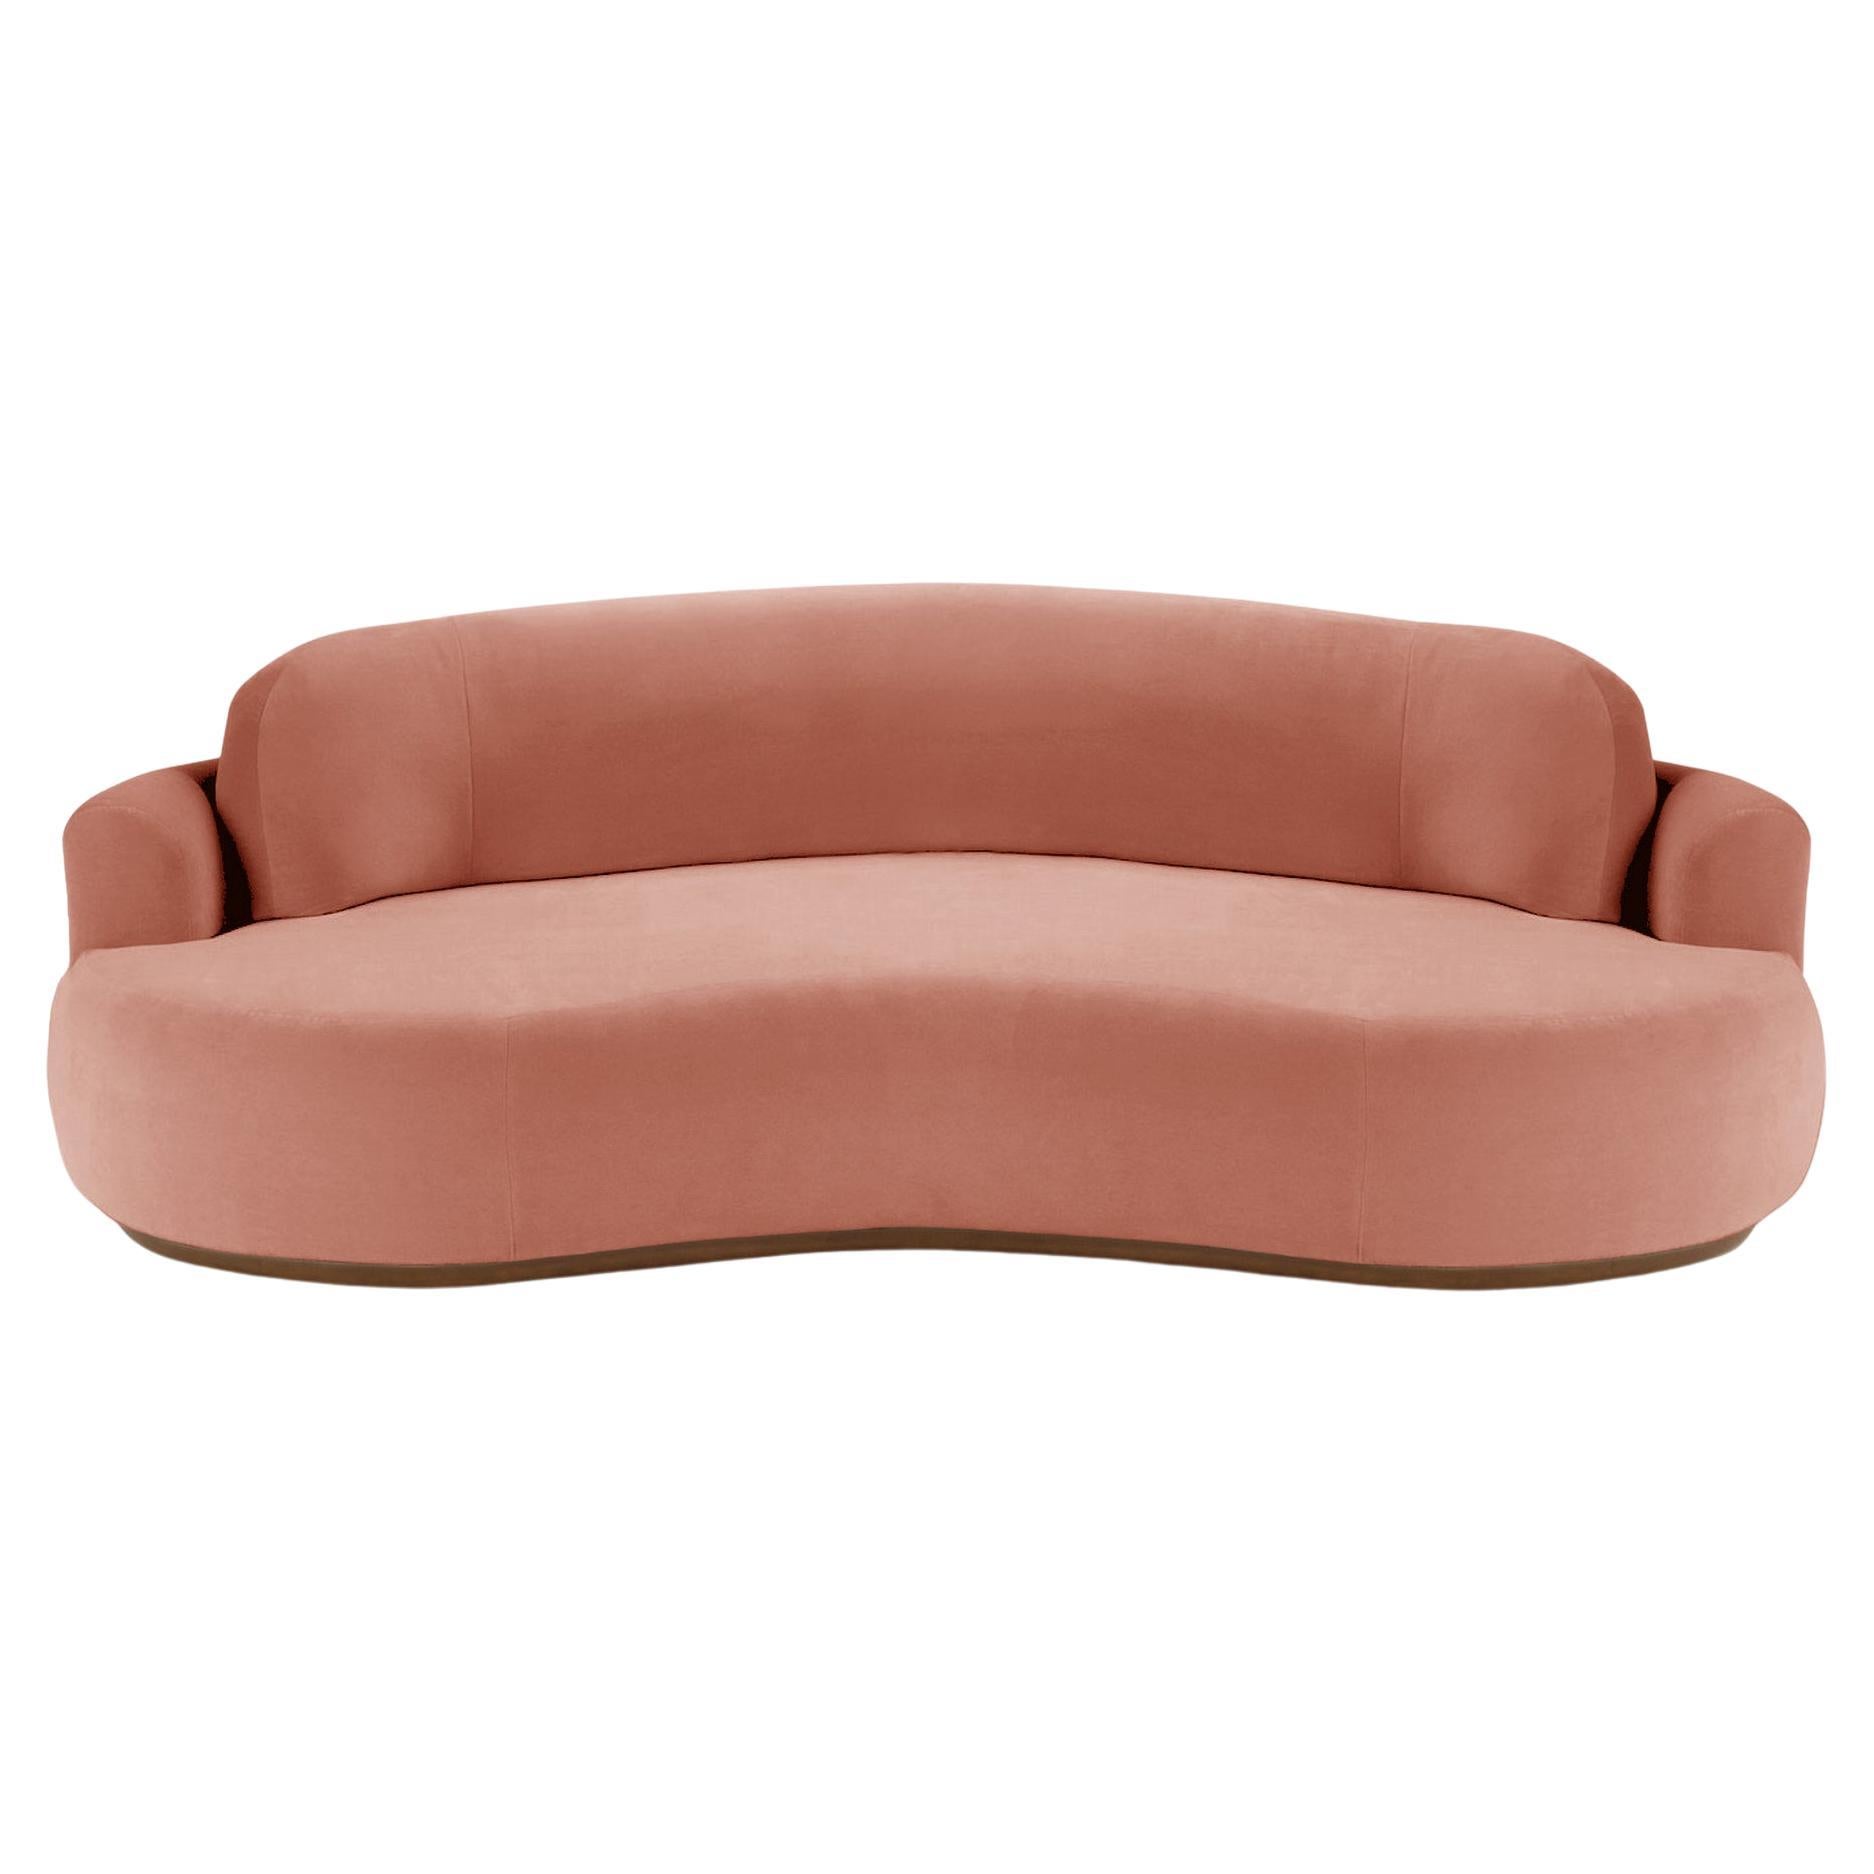 Naked Round Sofa, Large with Beech Ash-056-1 and Paris Brick